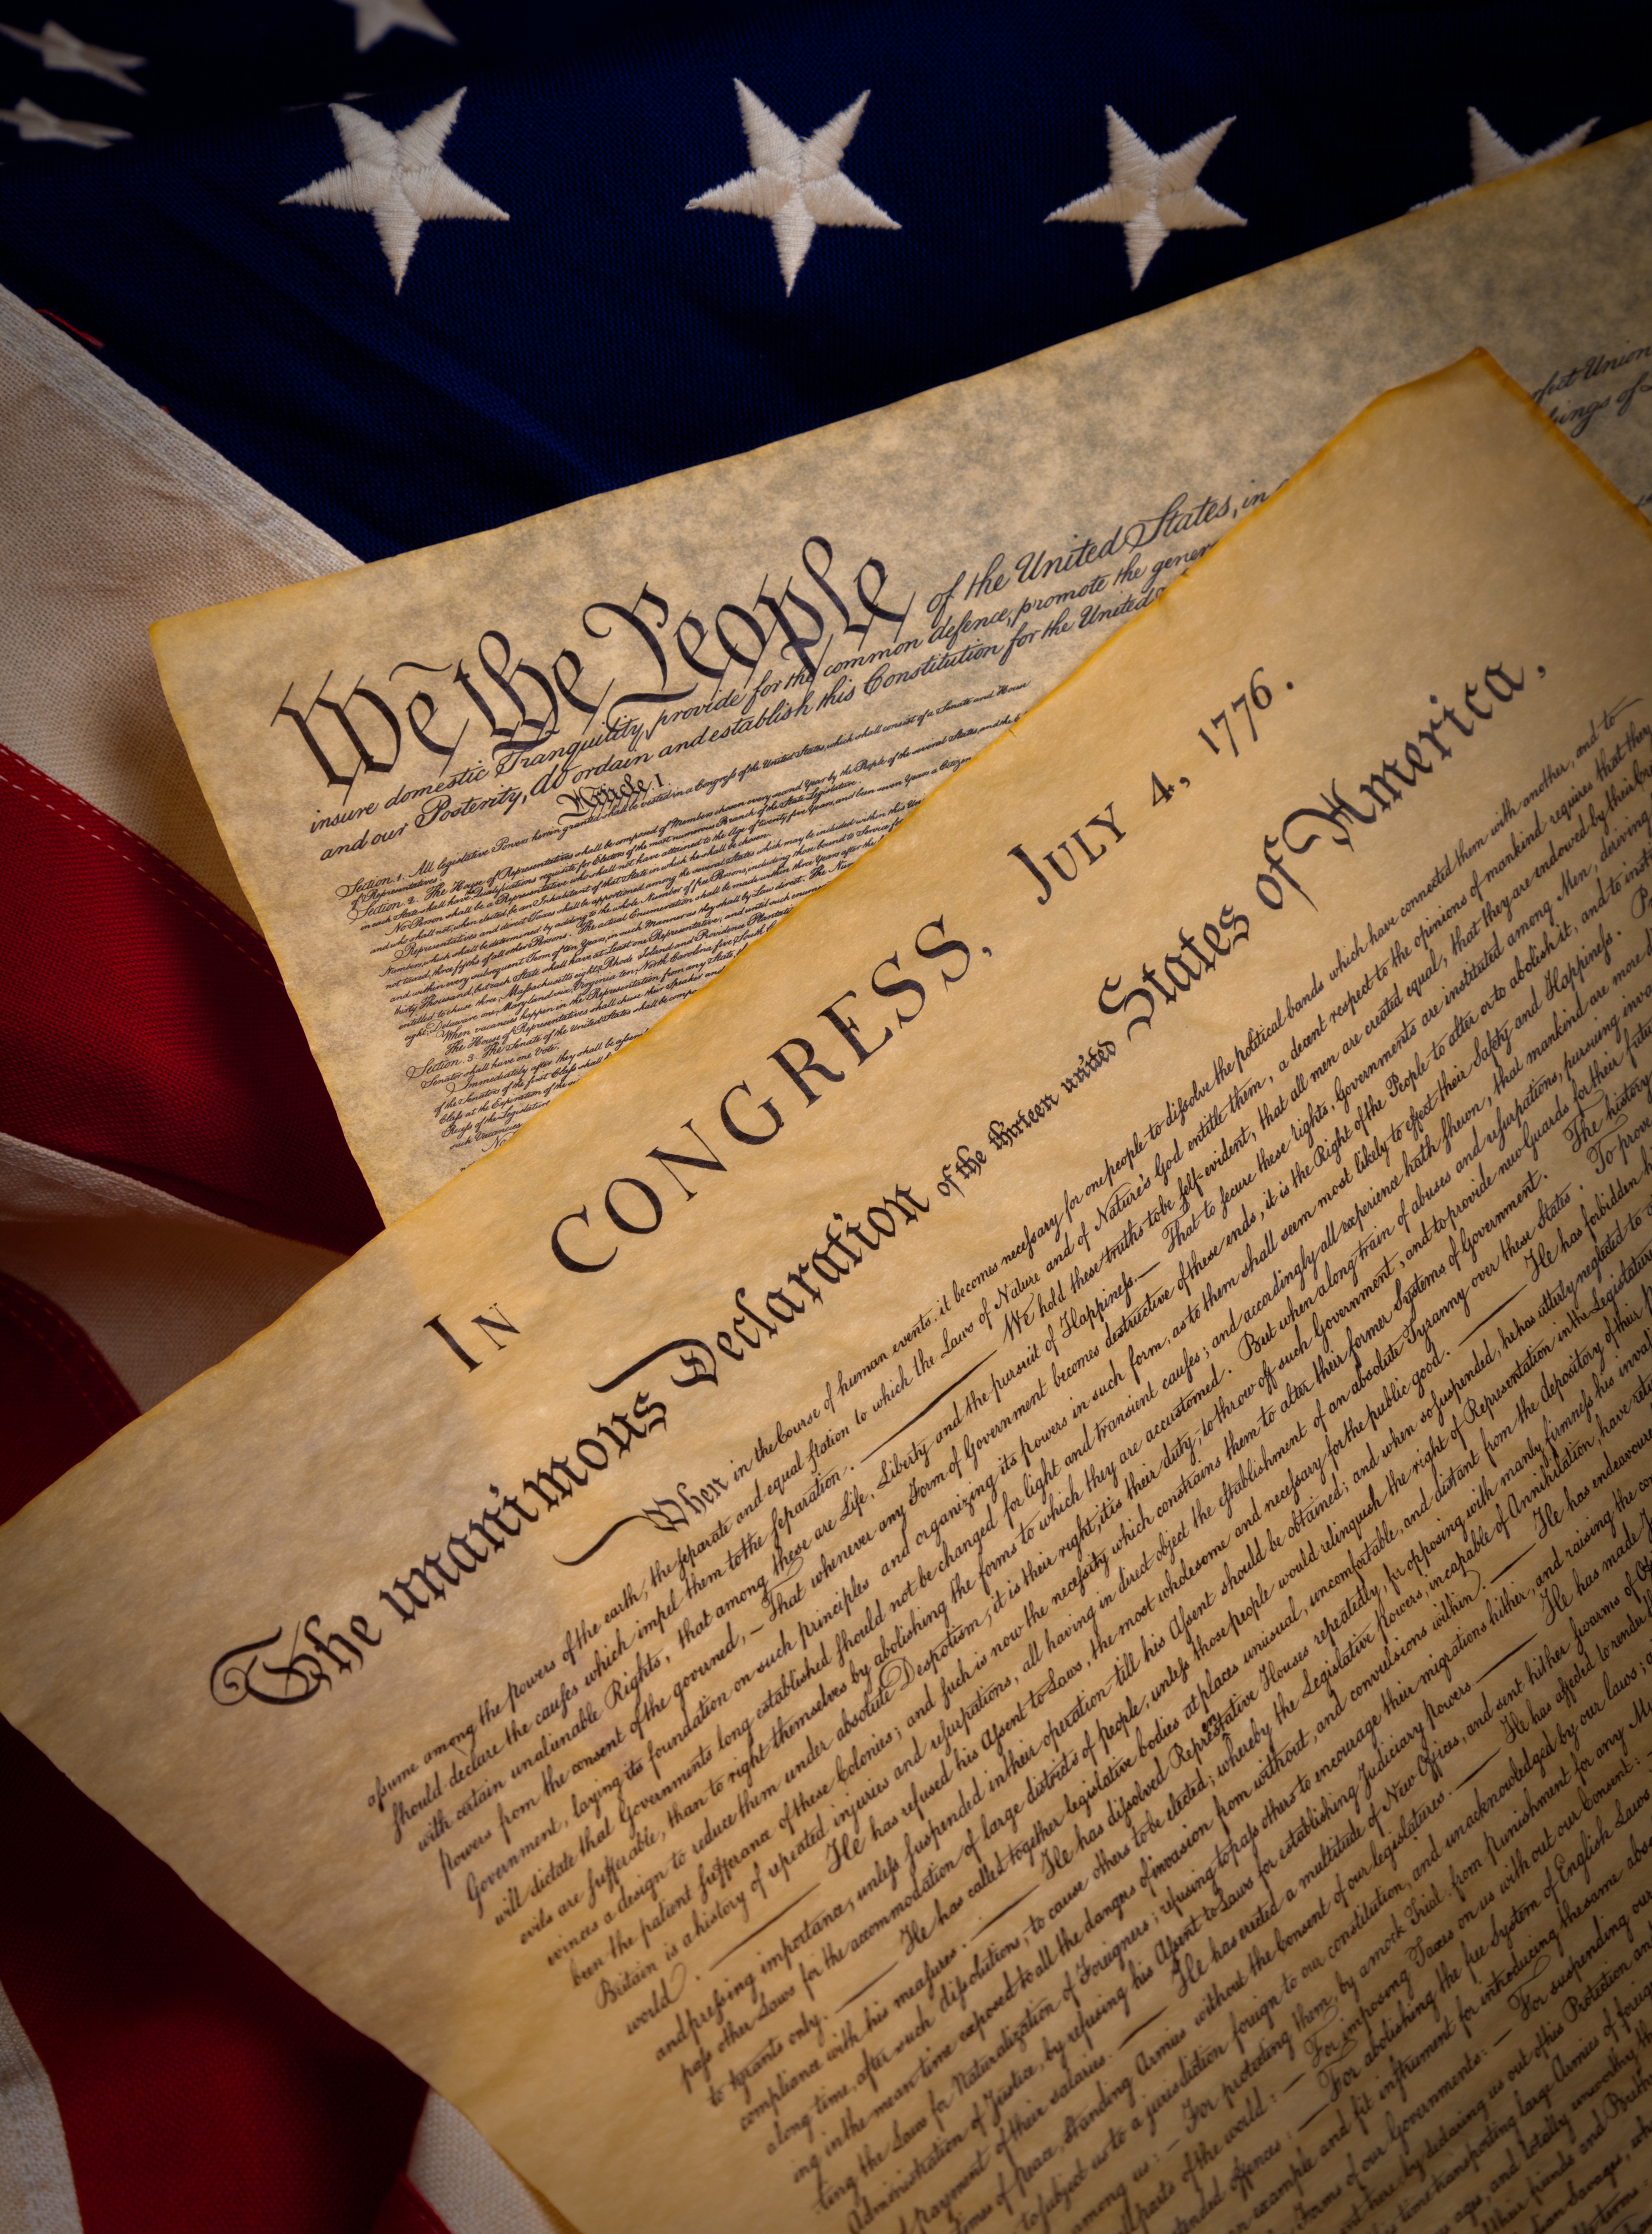 Section 1: The Constitution of the United States